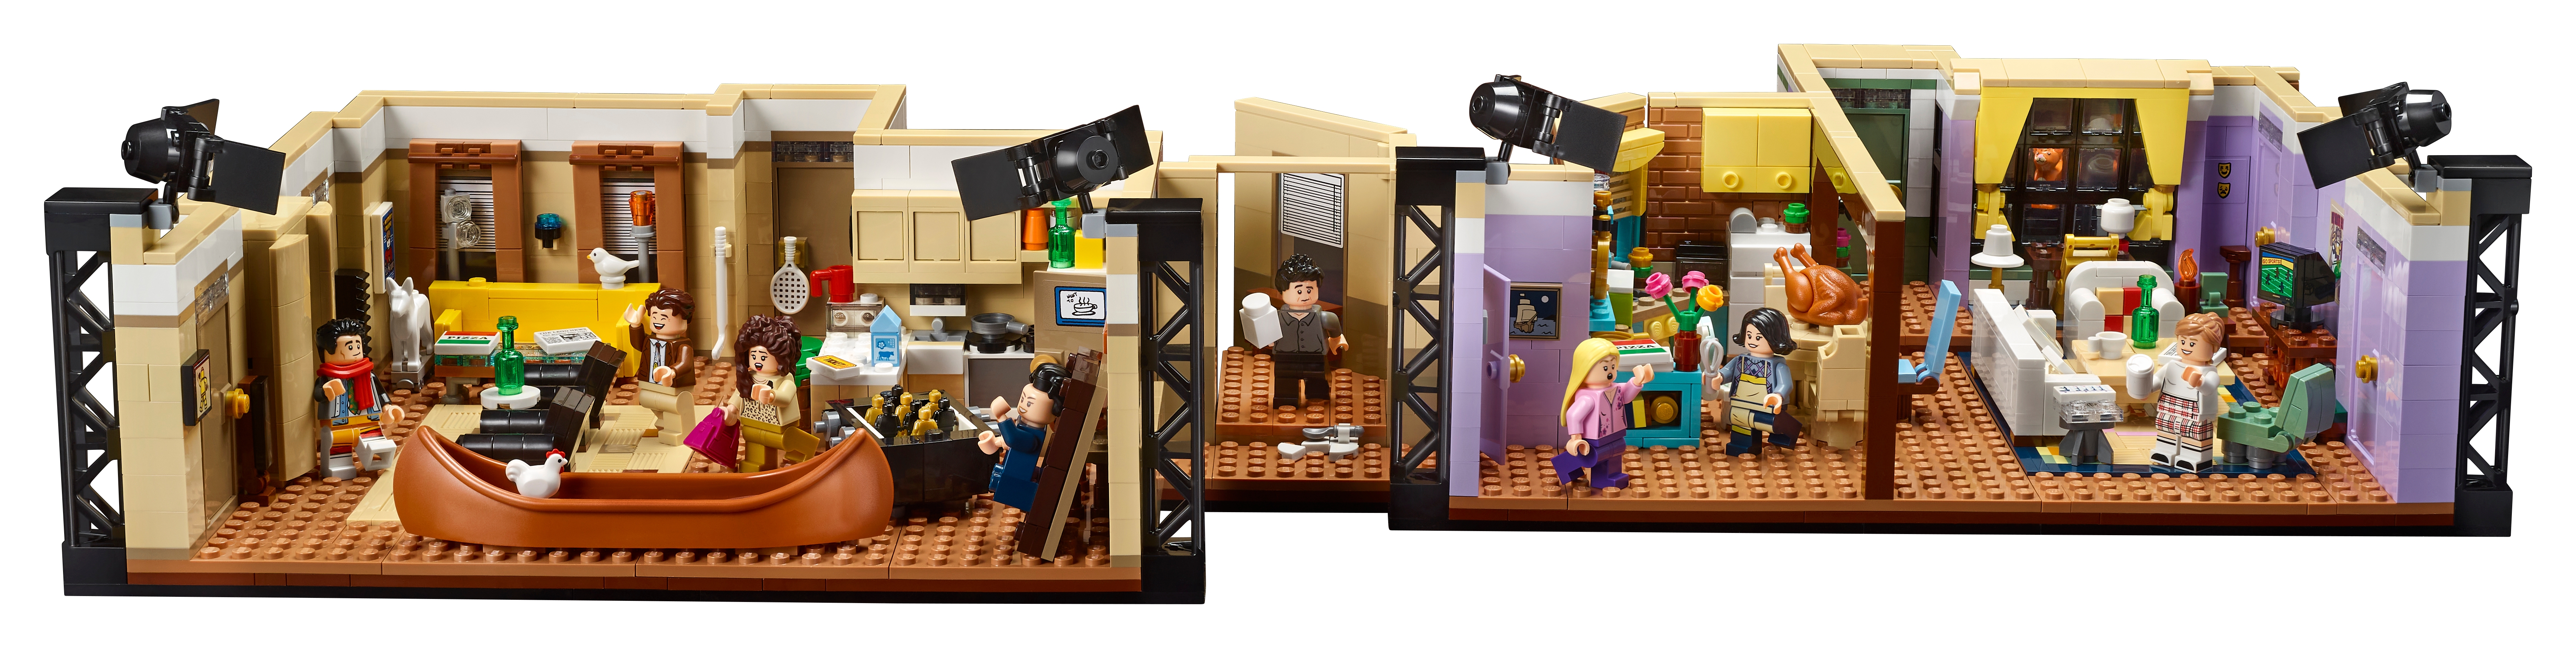 FRIENDS - The One With All The LEGOs 